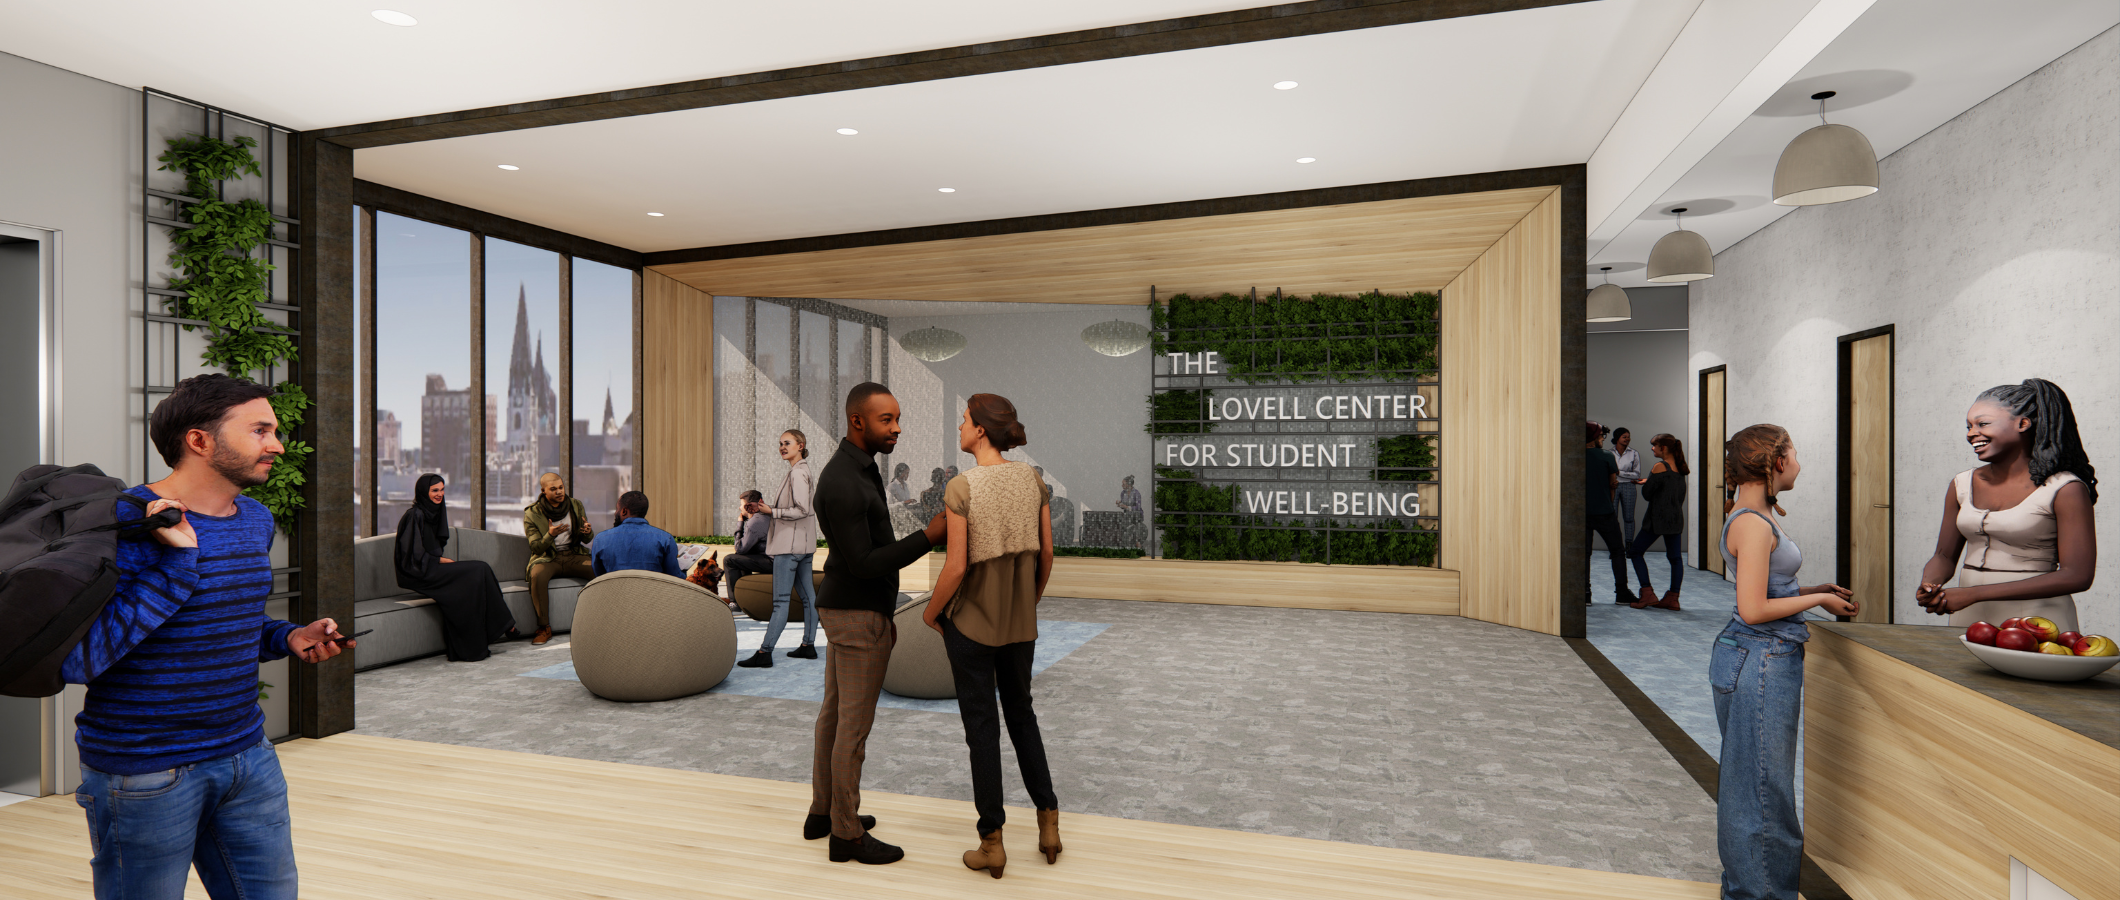 Rendering of Lovell Center for Student Well-Being